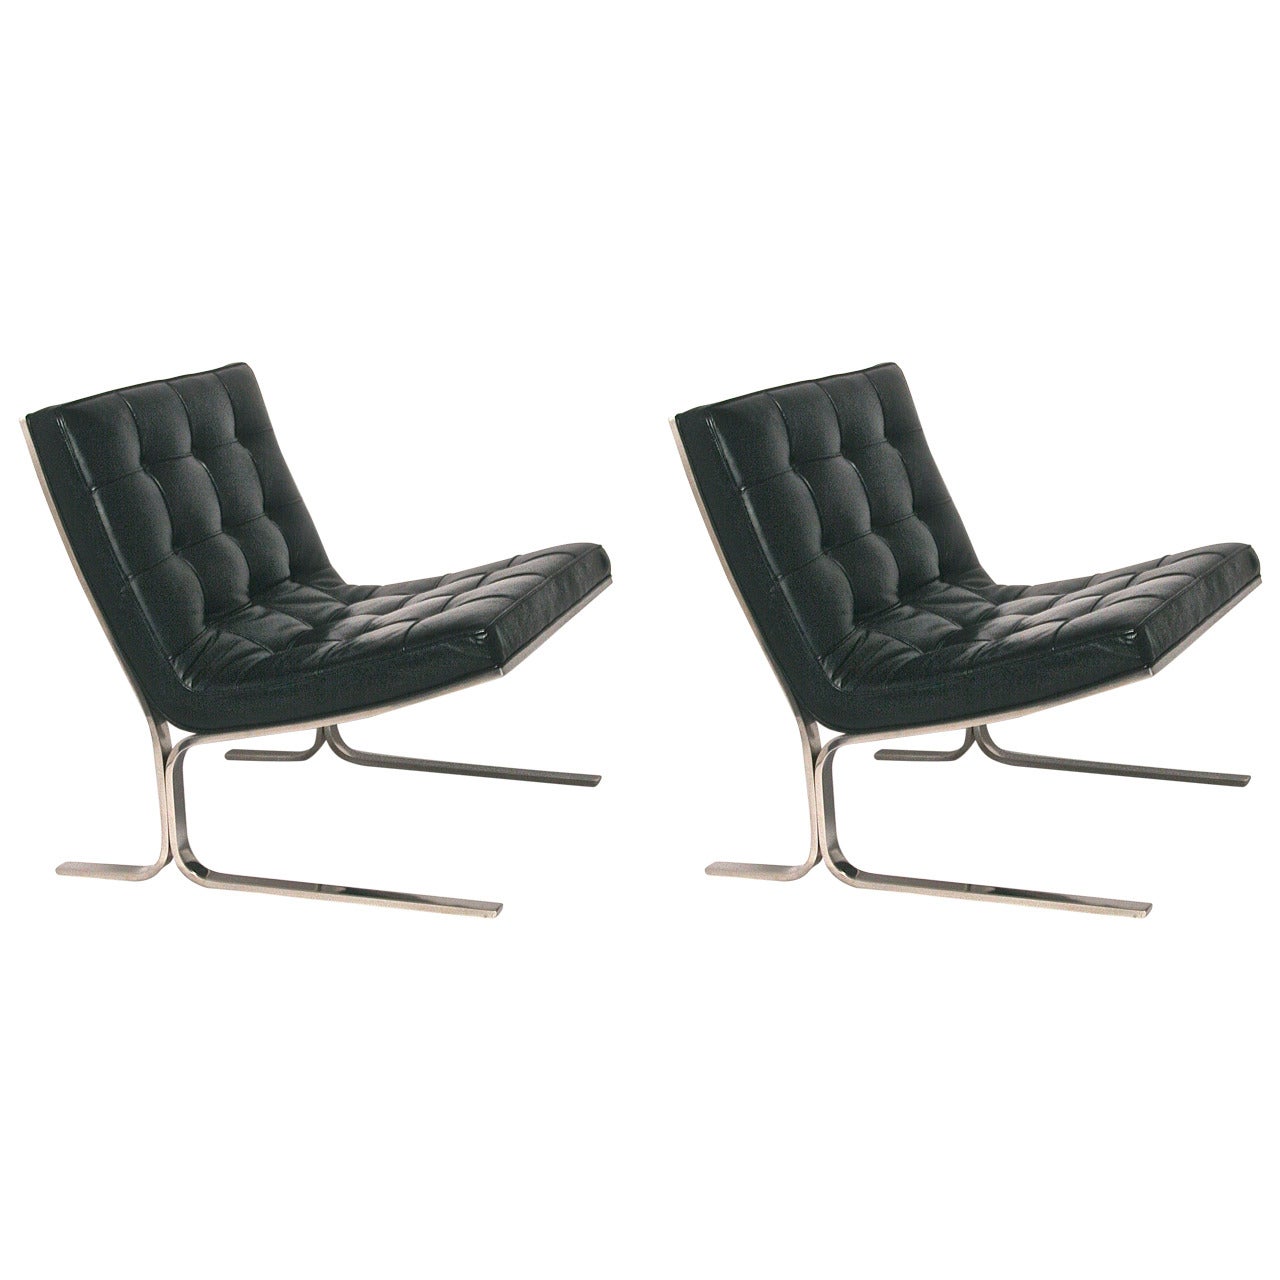 Pair of Nicos Zographos Black Leather Lounge Chairs